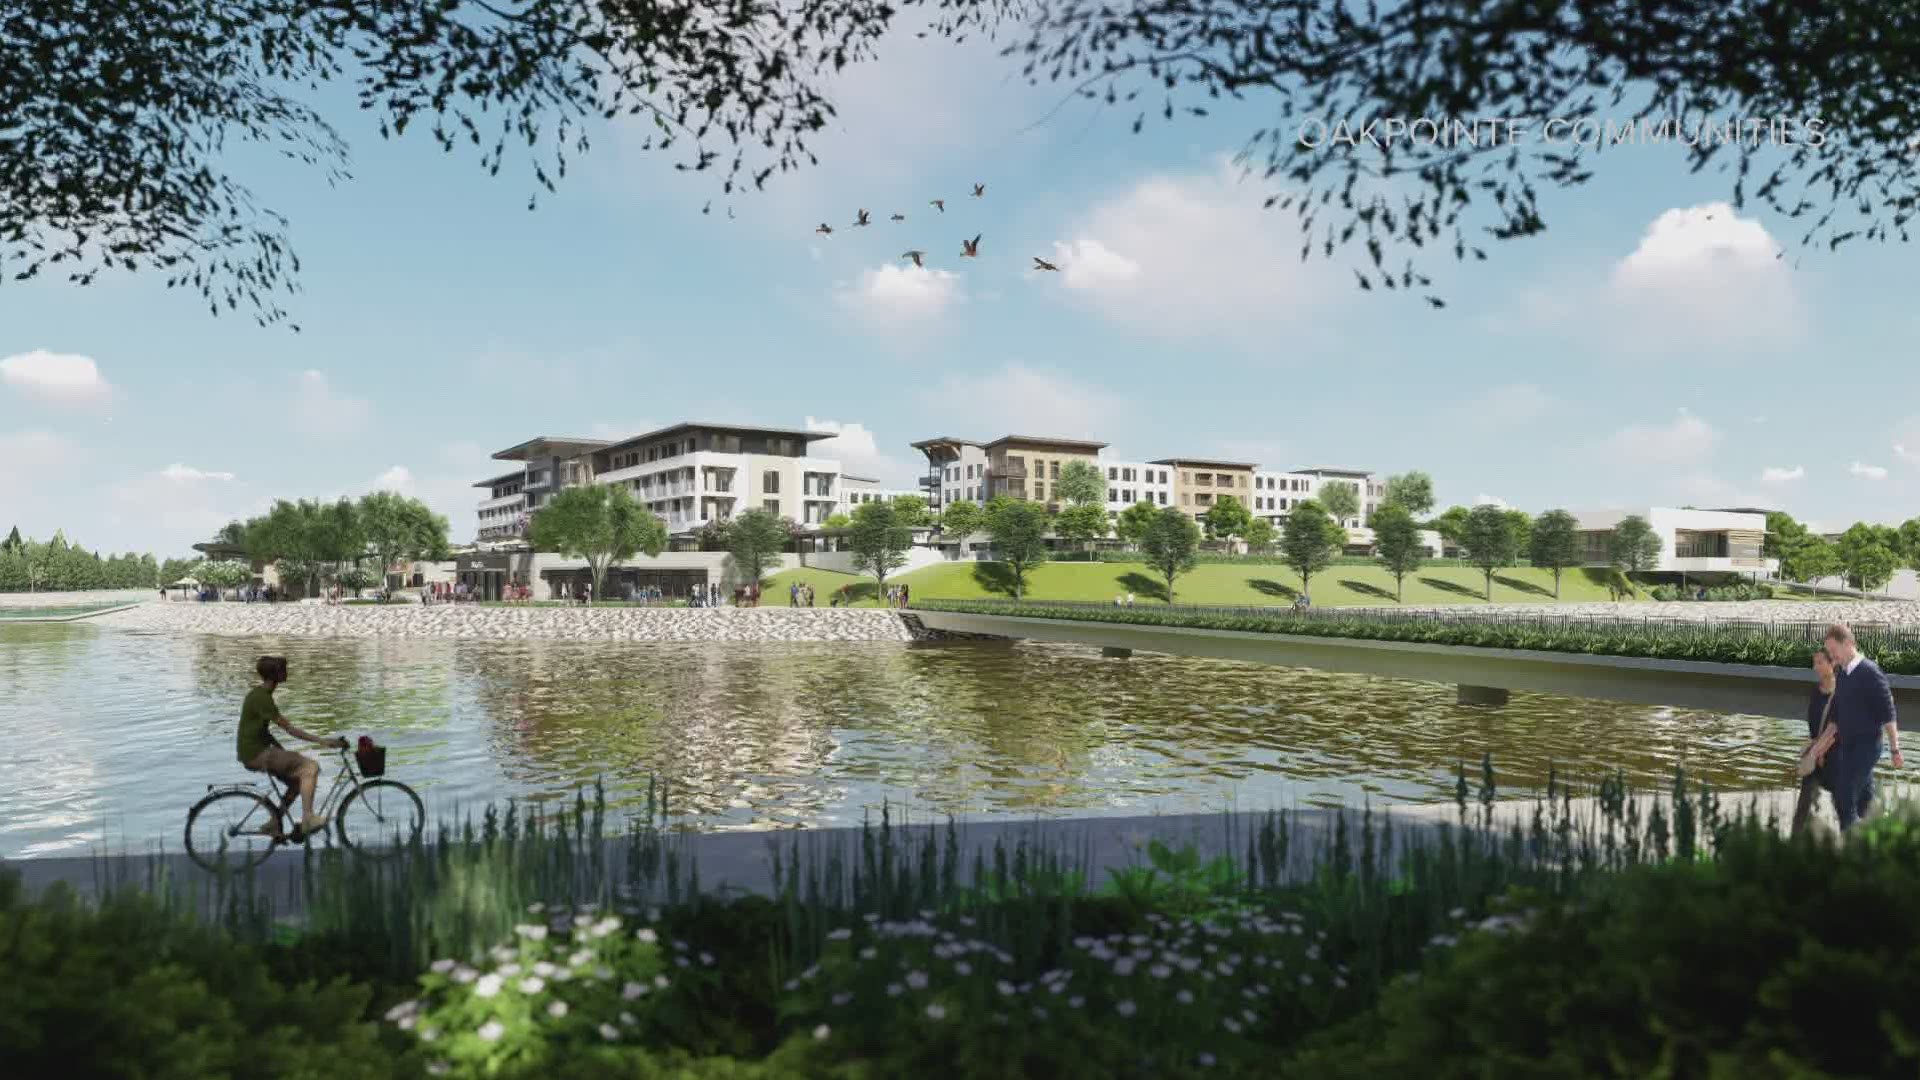 The city of Covington is receiving a new large scale urban village, movie theater and a town center among other developments.